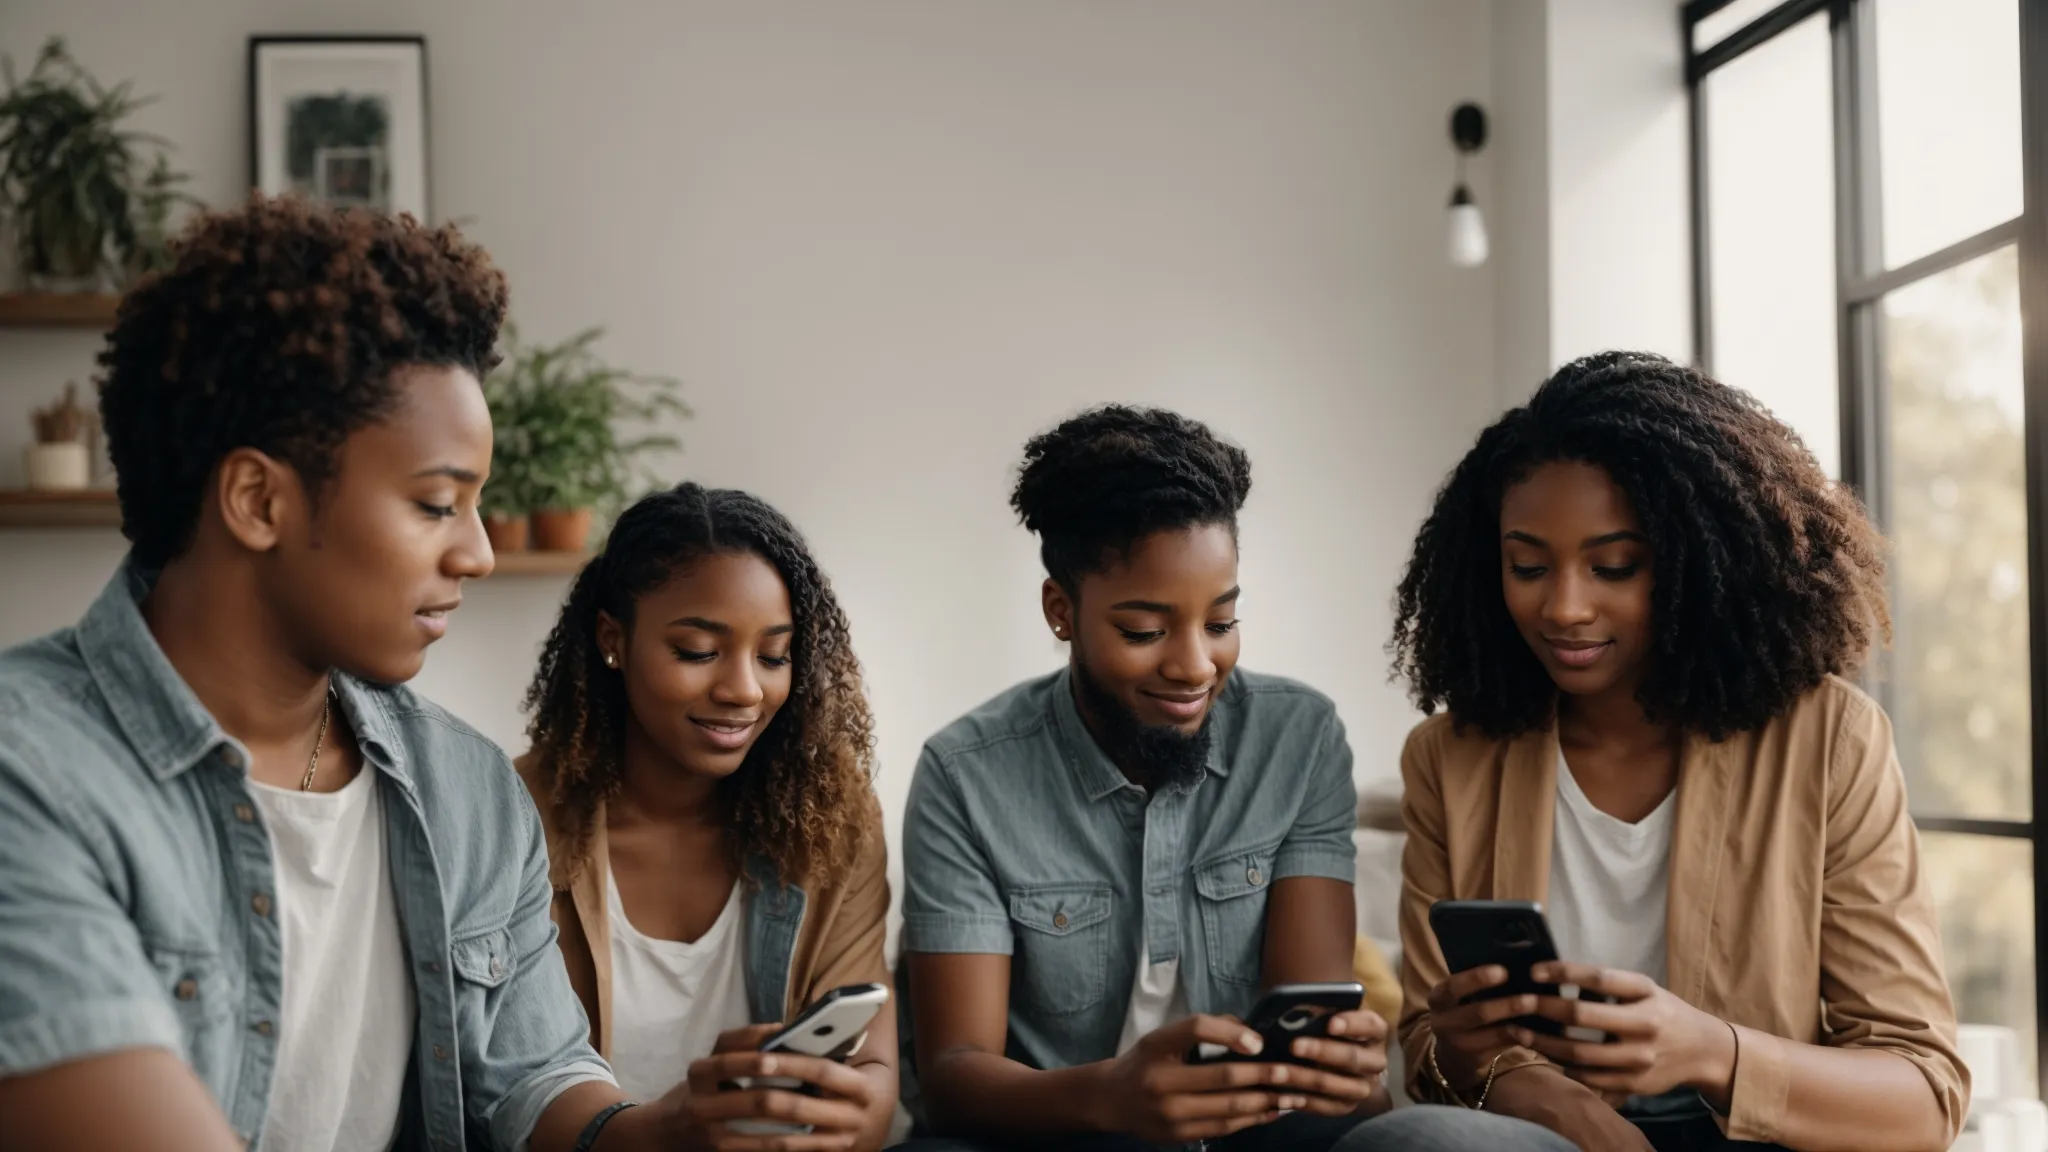 a group of diverse young adults gather around a smartphone, displaying graphs and trend lines, in a bright, modern living space.